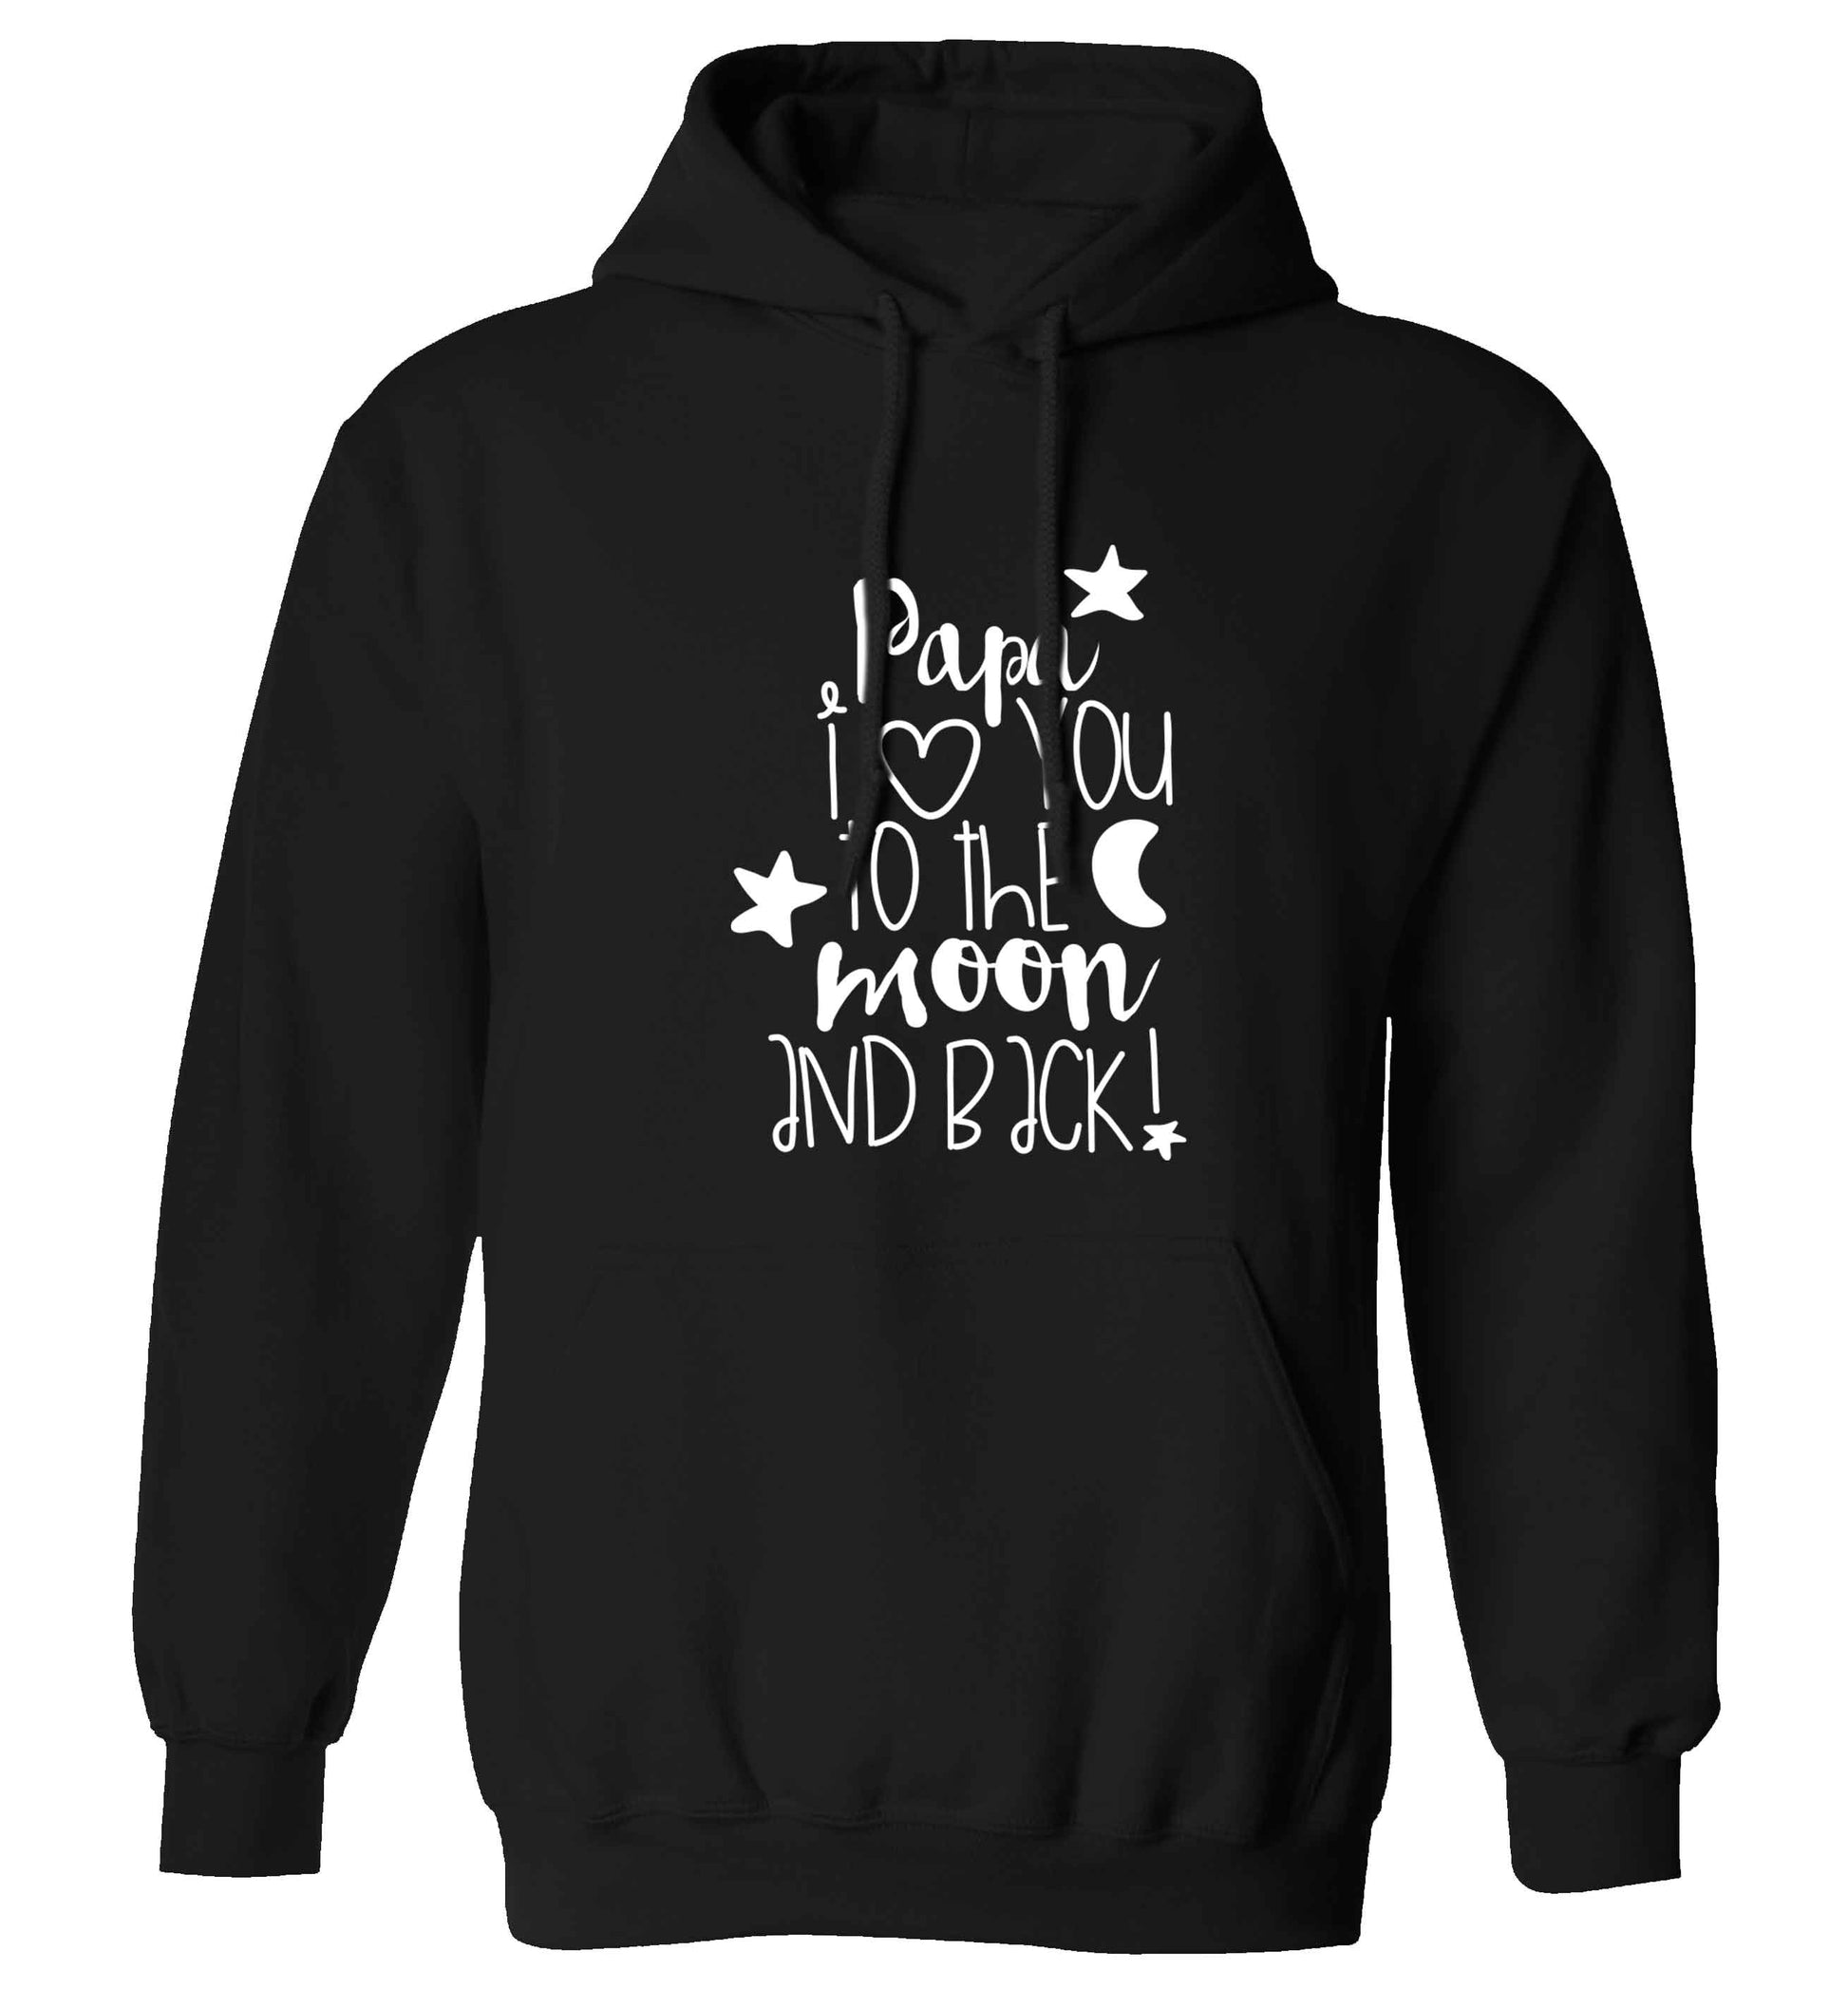 Papa I love you to the moon and back adults unisex black hoodie 2XL